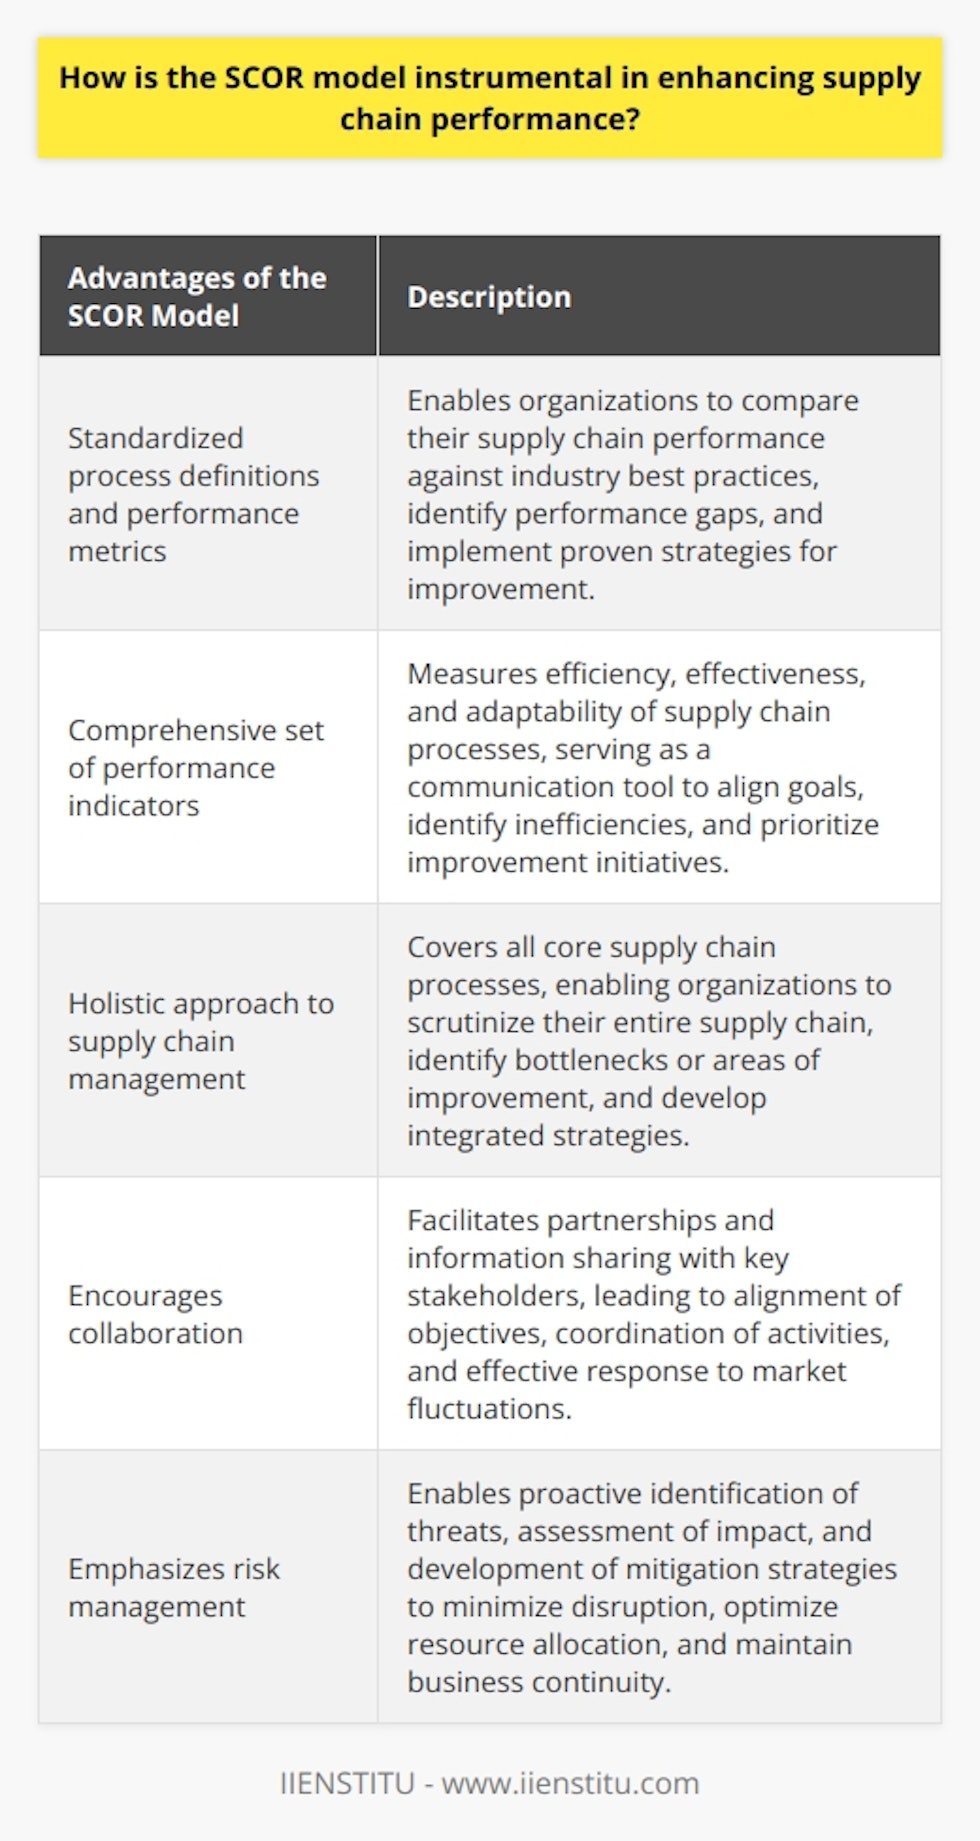 The SCOR model, also known as the Supply Chain Operations Reference model, is vital in enhancing supply chain performance for organizations. It provides a structured framework that enables companies to analyze, optimize, and benchmark their supply chain operations. By employing the SCOR model, organizations can gain a better understanding of their supply chain processes and identify areas that require improvement, ultimately leading to enhanced overall performance.One of the significant advantages of the SCOR model is its provision for standardized process definitions and performance metrics. This allows organizations to compare their supply chain performance against industry best practices. By benchmarking their processes, organizations can identify performance gaps and implement proven strategies to achieve superior results. The SCOR model enables companies to align their operations with established standards, leading to improved efficiency and effectiveness.The SCOR model also offers a comprehensive set of performance indicators that measure the efficiency, effectiveness, and adaptability of supply chain processes. These indicators serve as a communication tool to align organizational goals, identify process inefficiencies, and prioritize improvement initiatives. By continuously monitoring these metrics, organizations can track their progress and make necessary adjustments to optimize their supply chain performance.Furthermore, the SCOR model takes a holistic approach to supply chain management. It encompasses all core supply chain processes such as planning, sourcing, manufacturing, delivery, returns, and enabling functions. This comprehensive perspective allows organizations to scrutinize their entire supply chain and develop integrated strategies that address the interdependencies among processes. By considering the entire supply chain, organizations can identify potential bottlenecks or areas of improvement and implement solutions that drive synergistic outcomes.Collaboration is another significant aspect of the SCOR model. It encourages organizations to foster partnerships and share information with key stakeholders, including suppliers, customers, and logistics providers. By collaborating, organizations can align objectives, coordinate activities, and respond effectively to market fluctuations. Through effective collaboration, organizations can achieve a competitive advantage by enhancing the flow of information, reducing lead times, and improving customer satisfaction.Lastly, the SCOR model underscores the importance of risk management in supply chain processes. It enables organizations to proactively identify potential threats, assess their impact, and devise mitigation strategies. By incorporating risk management practices, organizations can minimize disruption, optimize resource allocation, and maintain business continuity.In conclusion, the SCOR model is instrumental in enhancing supply chain performance through its focus on process standardization, benchmarking, performance measurement and monitoring, holistic management, collaboration, and risk management. By adopting the principles and practices of the SCOR model, organizations can improve their supply chain efficiency, effectiveness, and agility, ultimately leading to a competitive advantage in the marketplace.